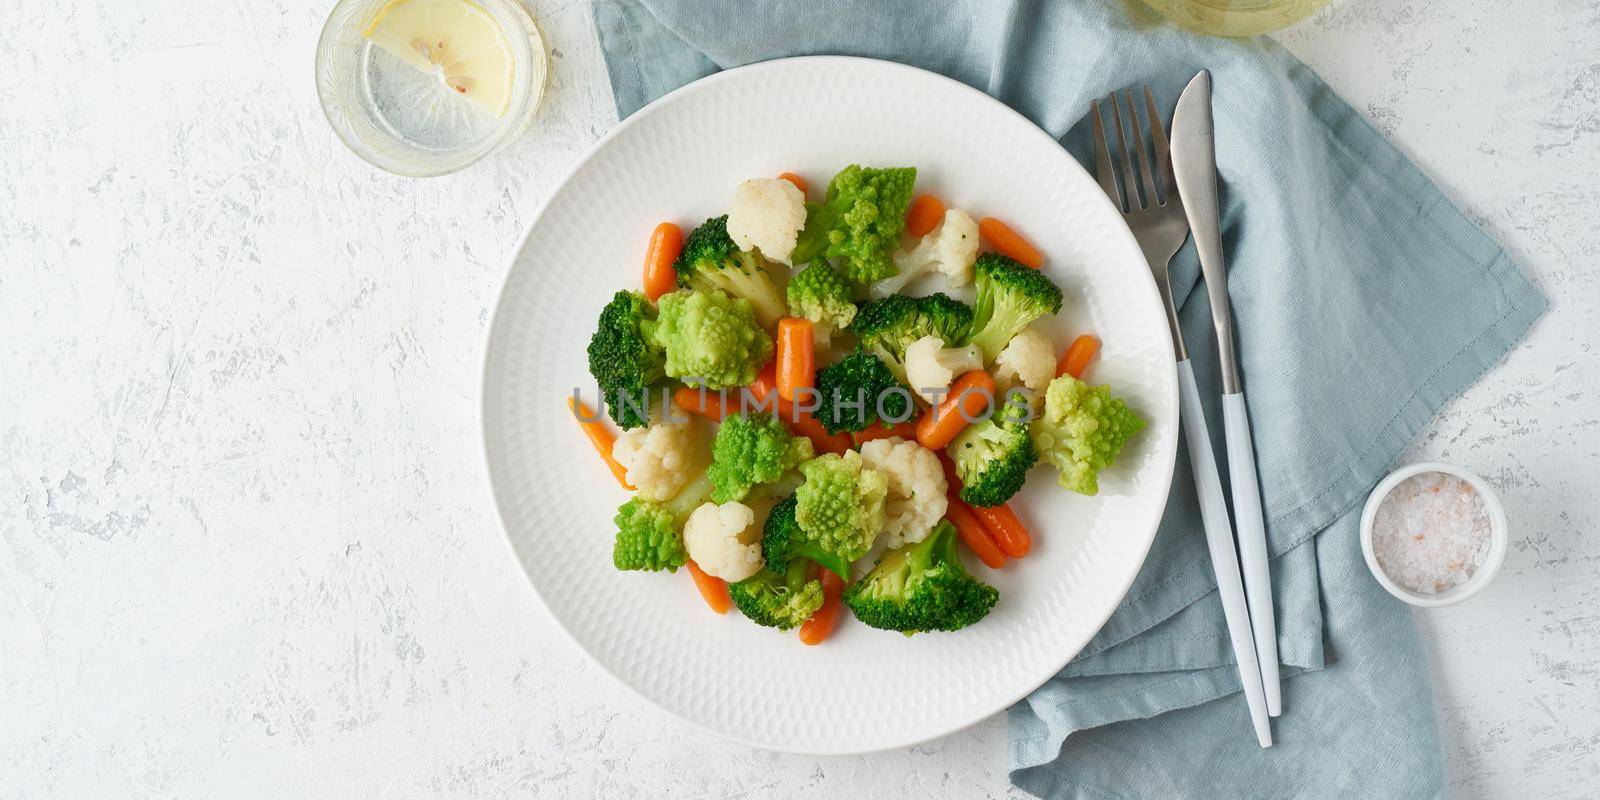 Mix of boiled vegetables. Broccoli, carrots, cauliflower. Steamed vegetables for low-calorie diet by NataBene